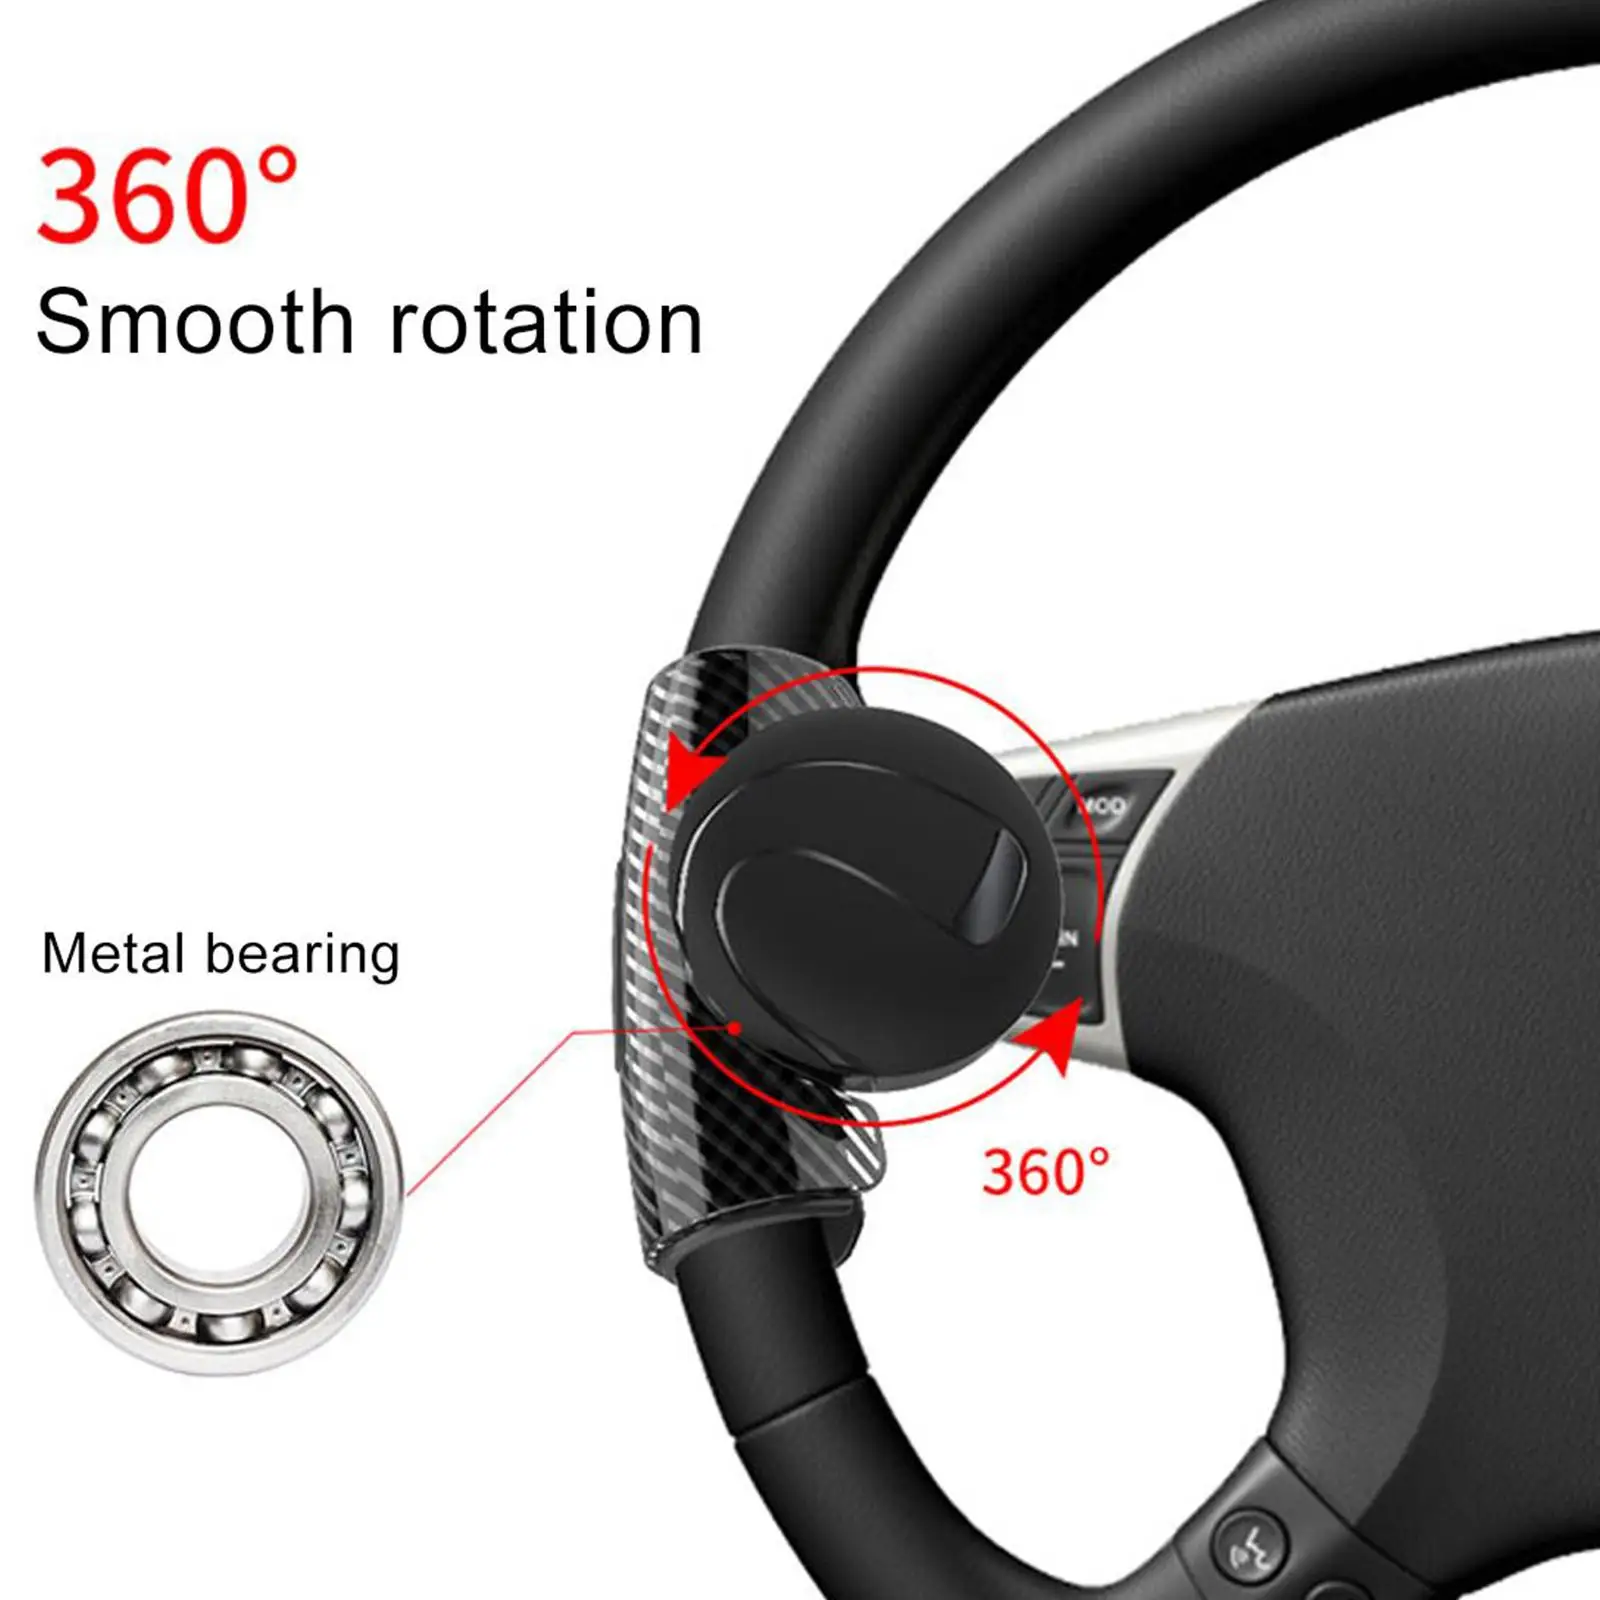 Universal Car Steering Spinner Knob 360 Degree Smooth Driving For 15 "wheels For Cars Gaming Steering Wheel Golf 7 Gte